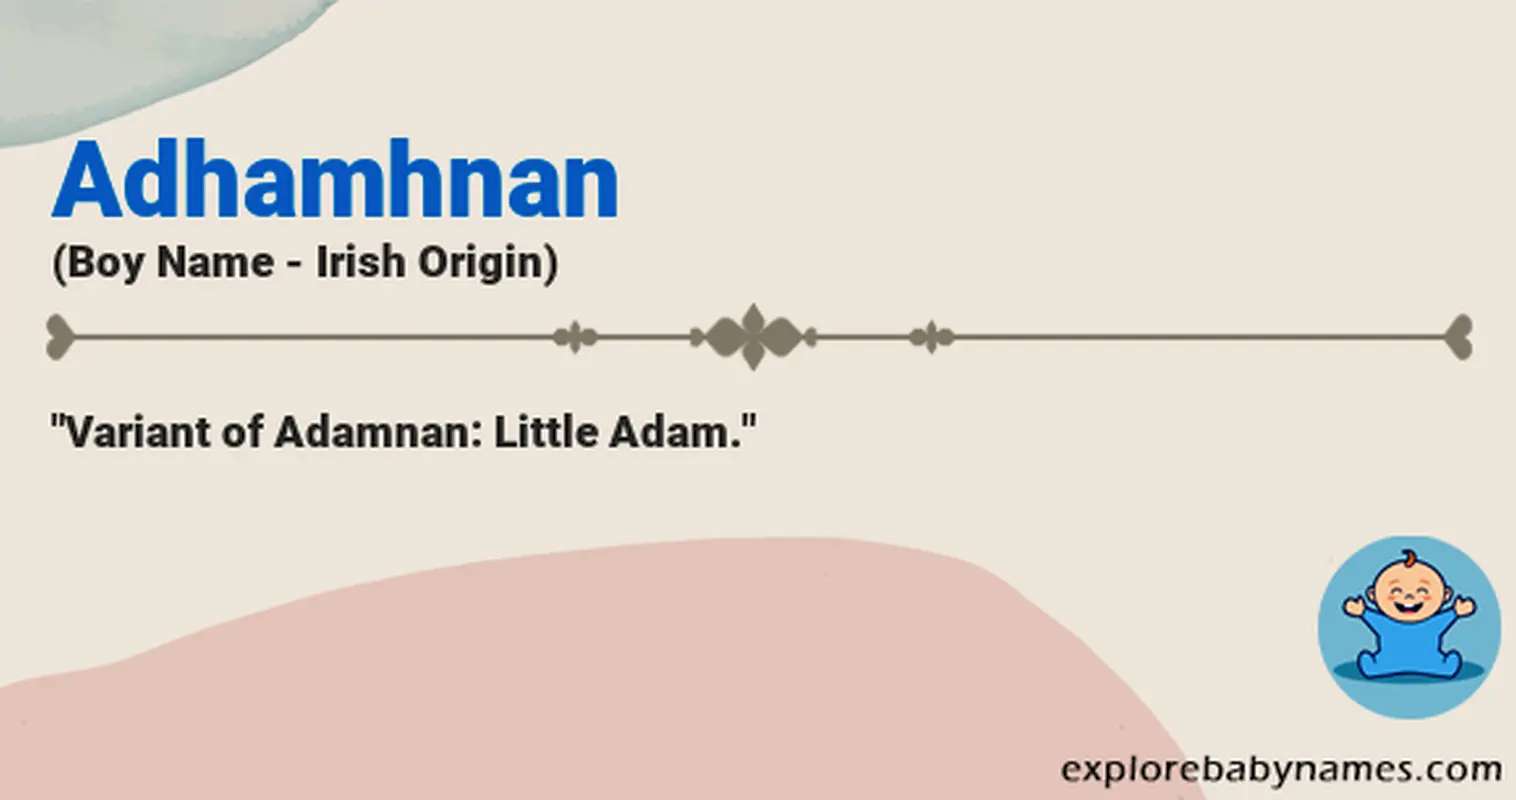 Meaning of Adhamhnan